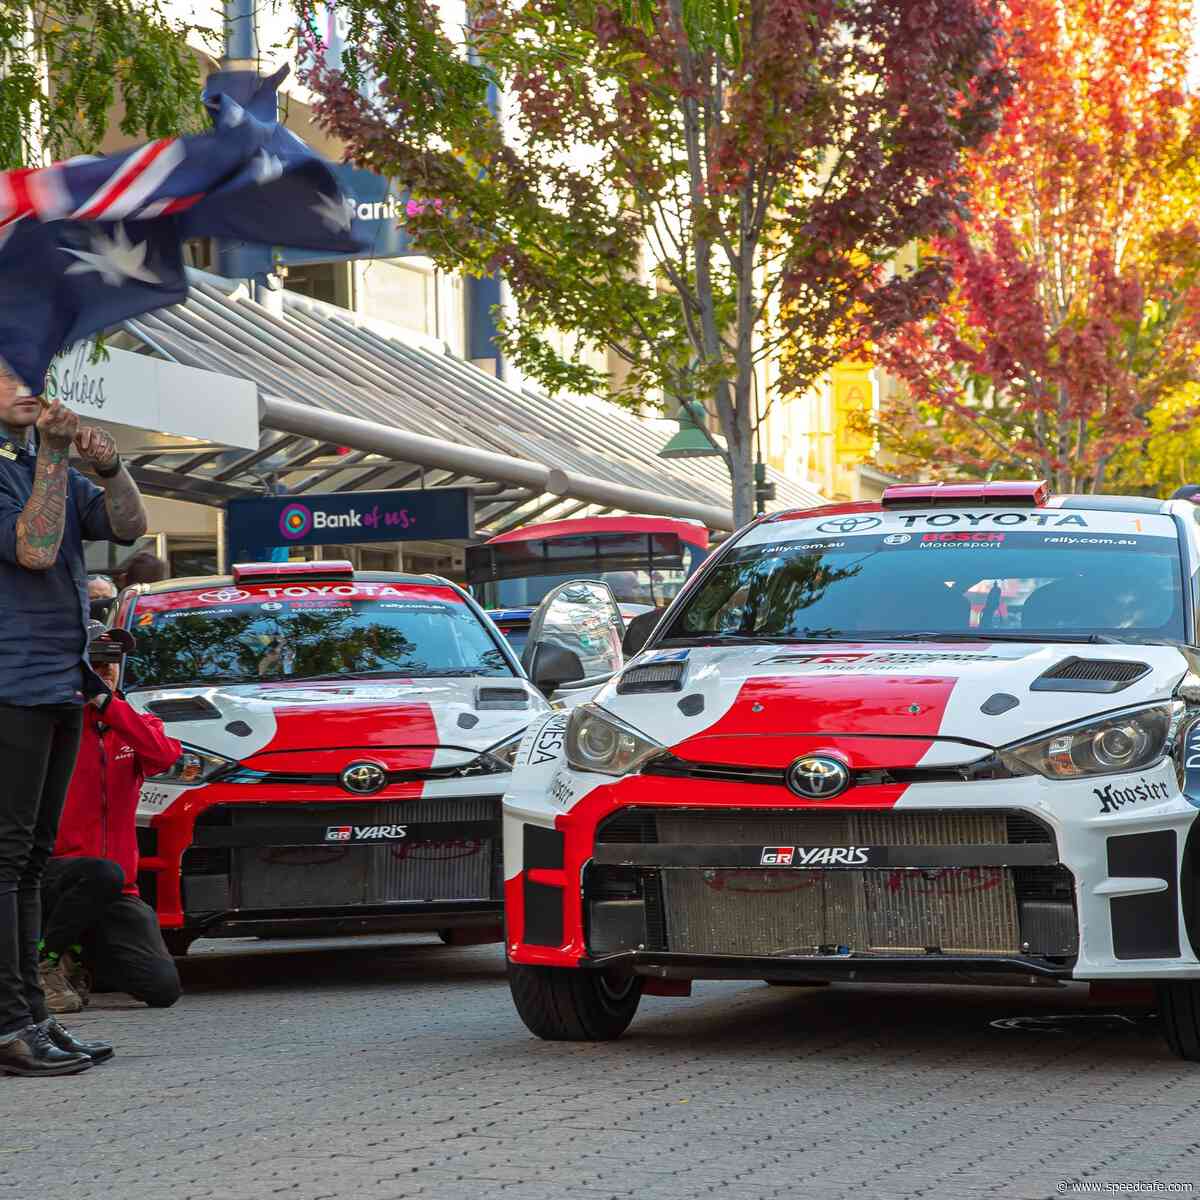 Bates leads Rally Launceston at end of Day 1